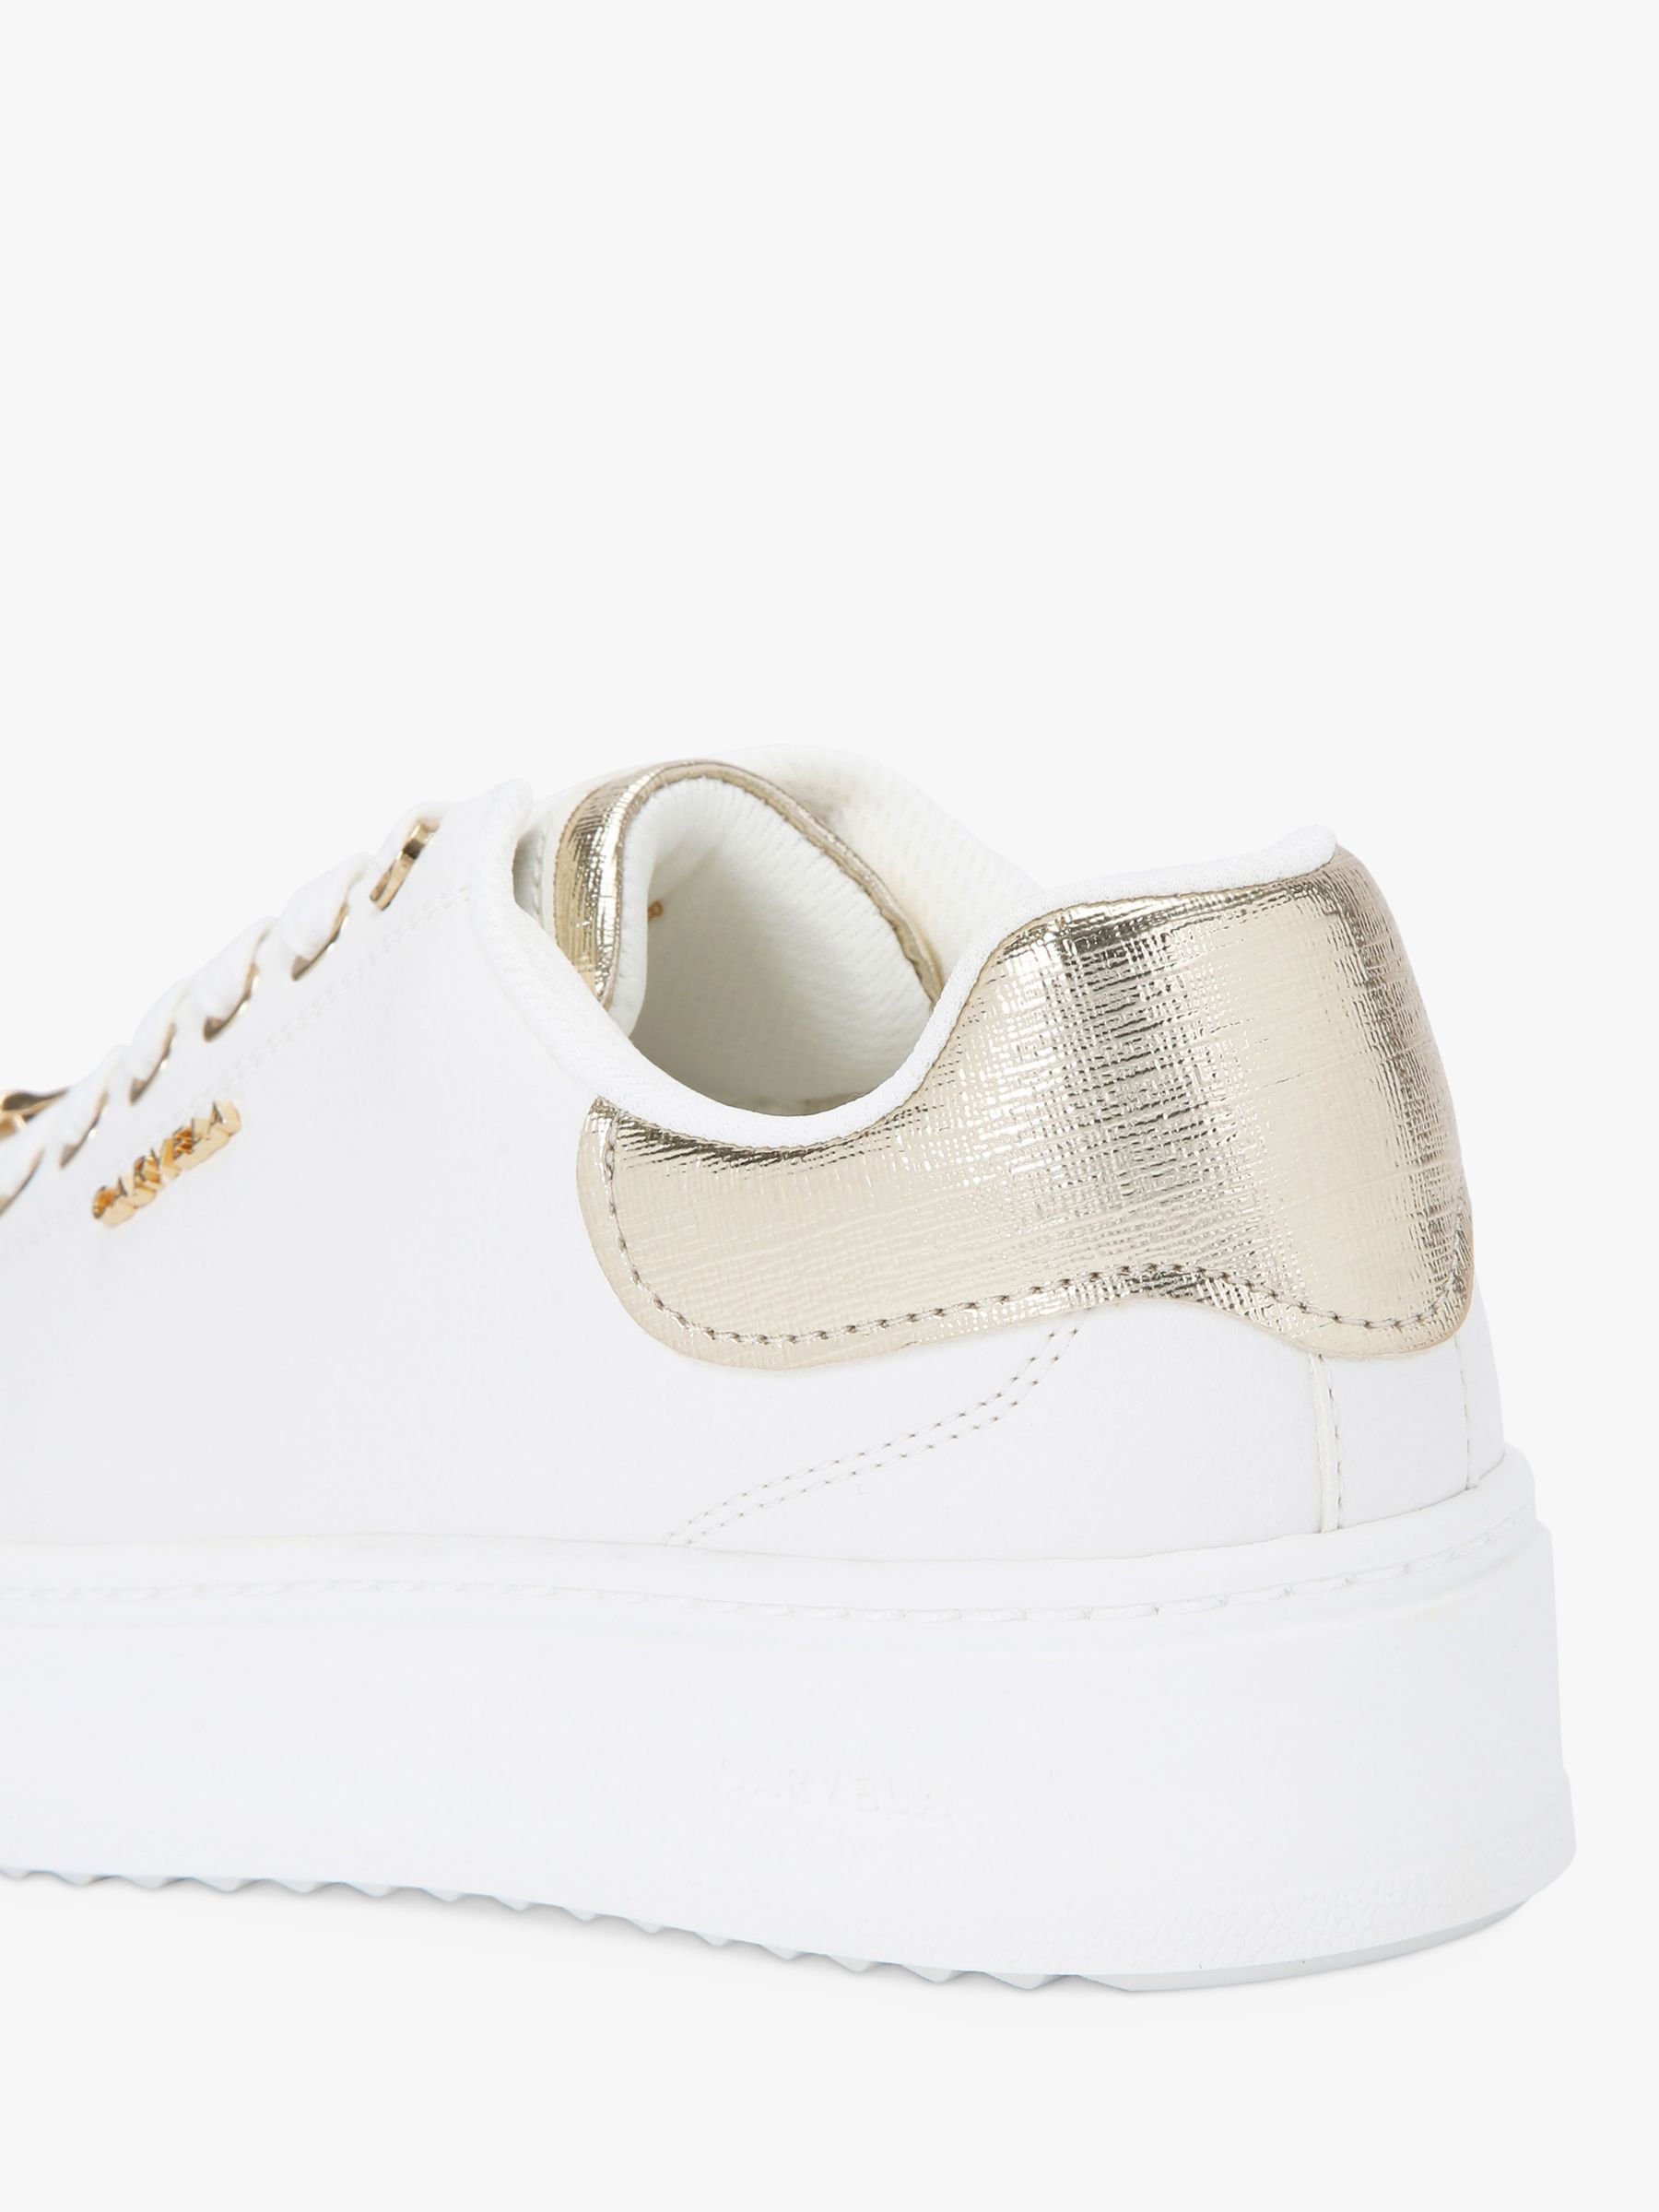 Carvela Dream Lace Up Trainers, White at John Lewis & Partners